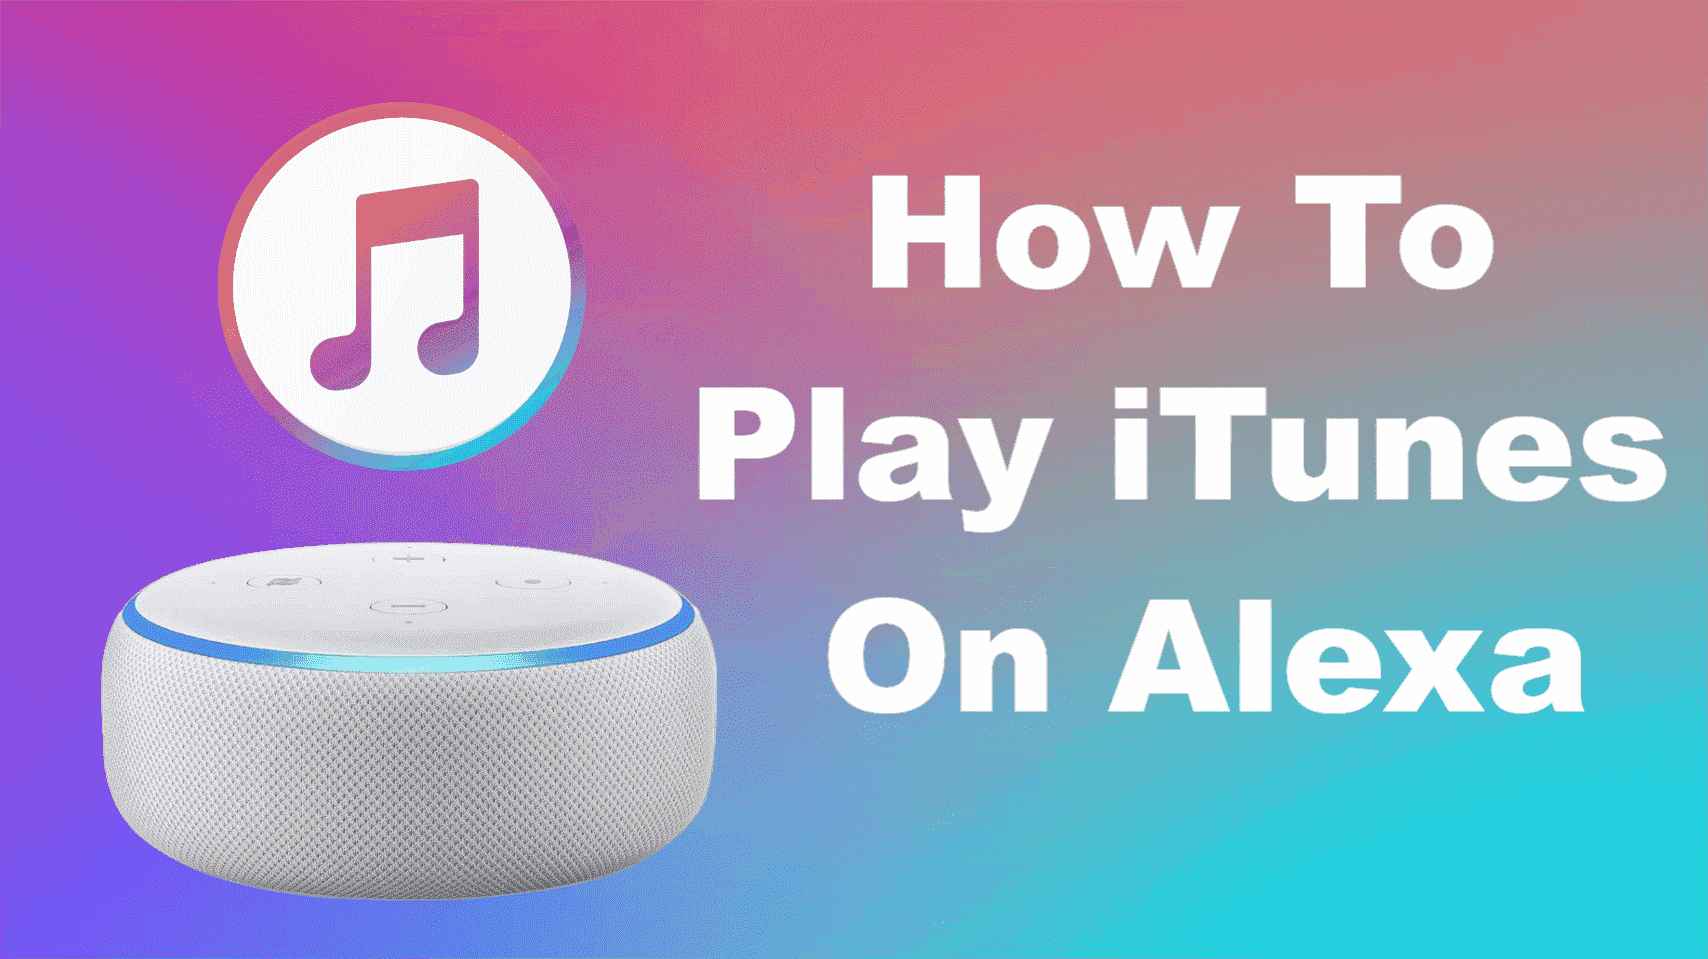 How To Play iTunes On Alexa